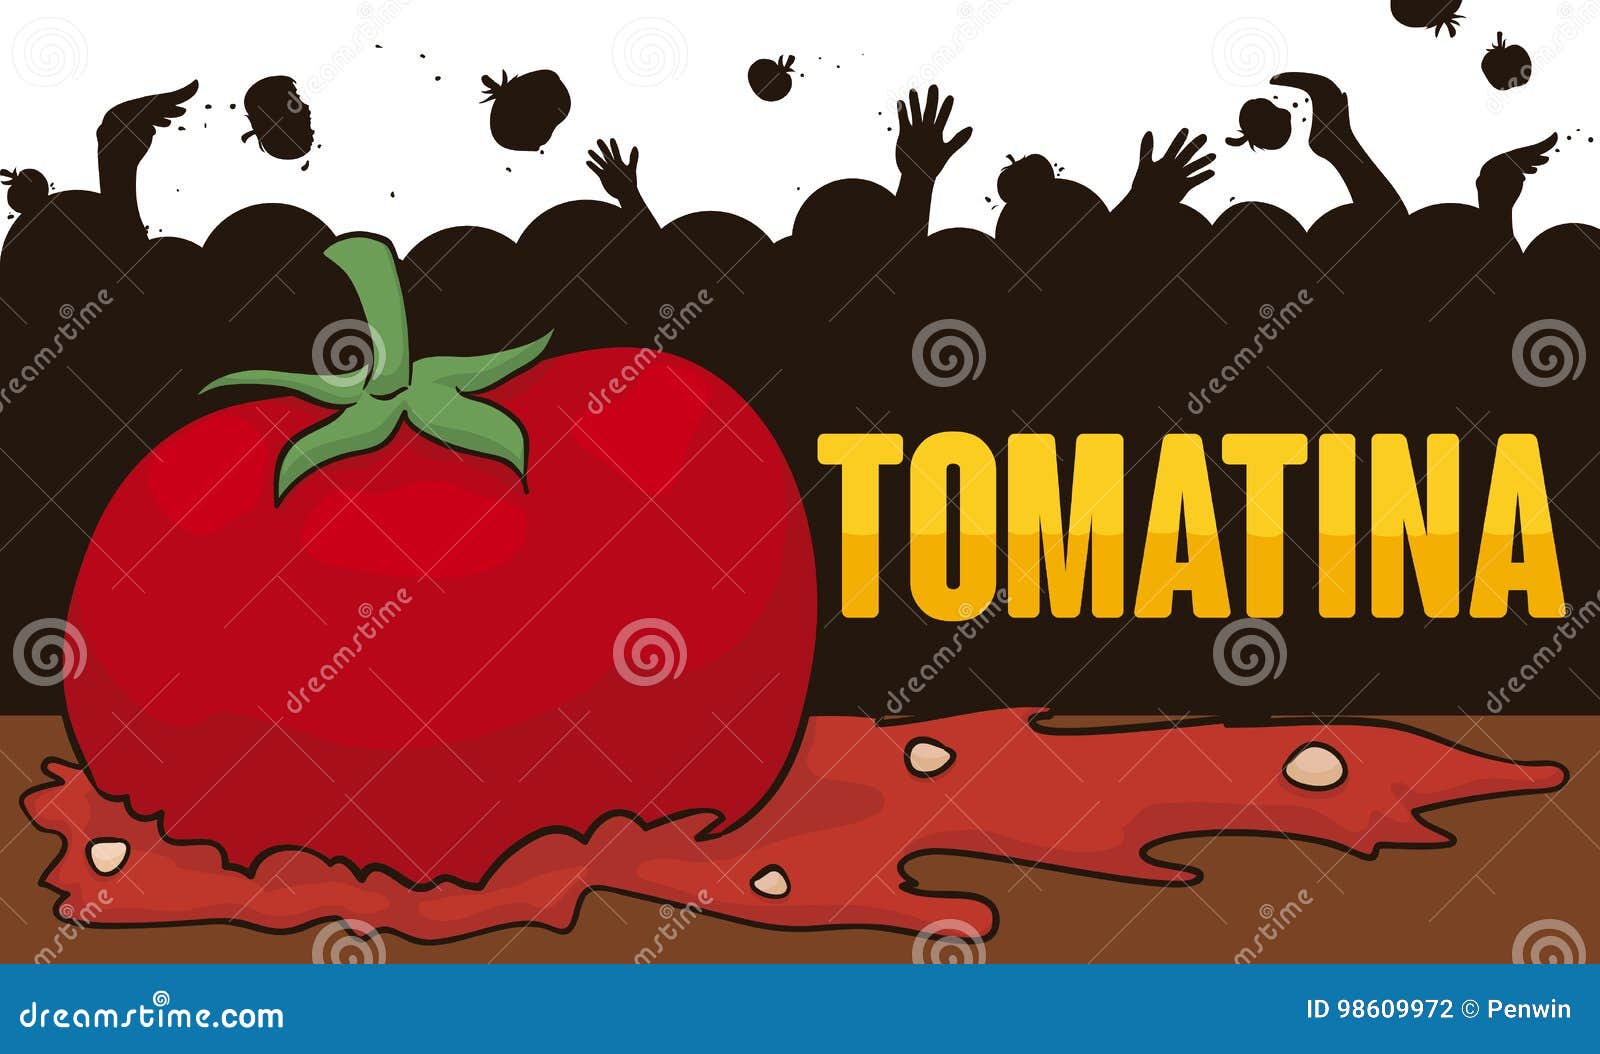 silhouette  with people throwing tomatoes in tomatina event,  